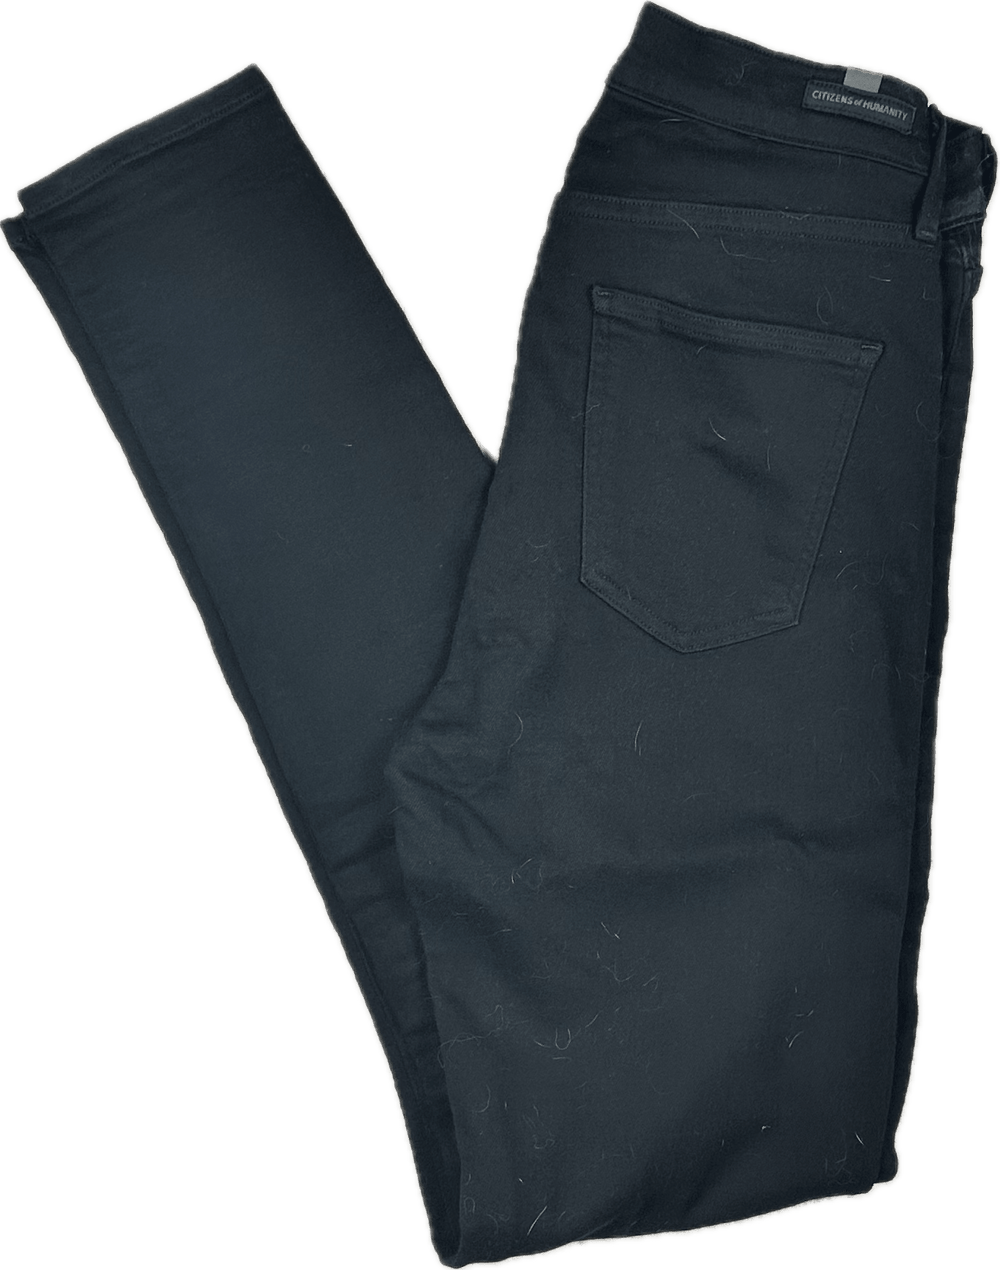 Citizens of Humanity 'Rocket' High Rise Black Skinny Jeans - Size 27 - Jean Pool